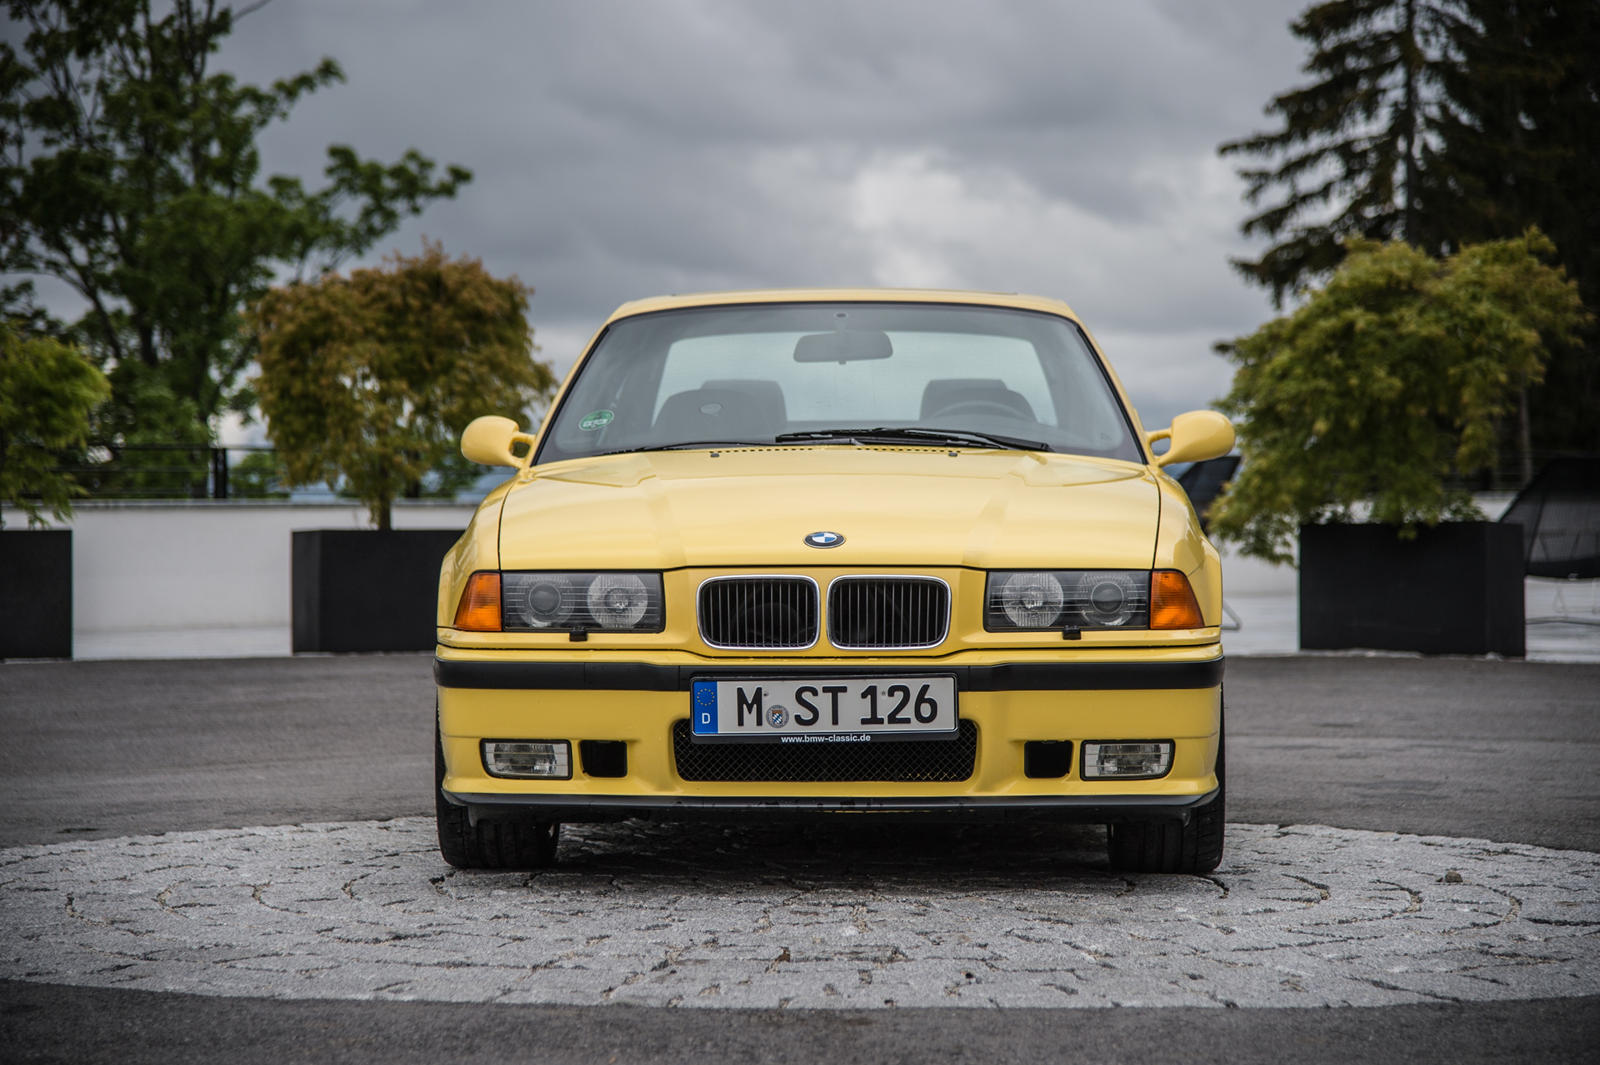 BMW M3 E36 2nd Generation - What To Check Before You Buy